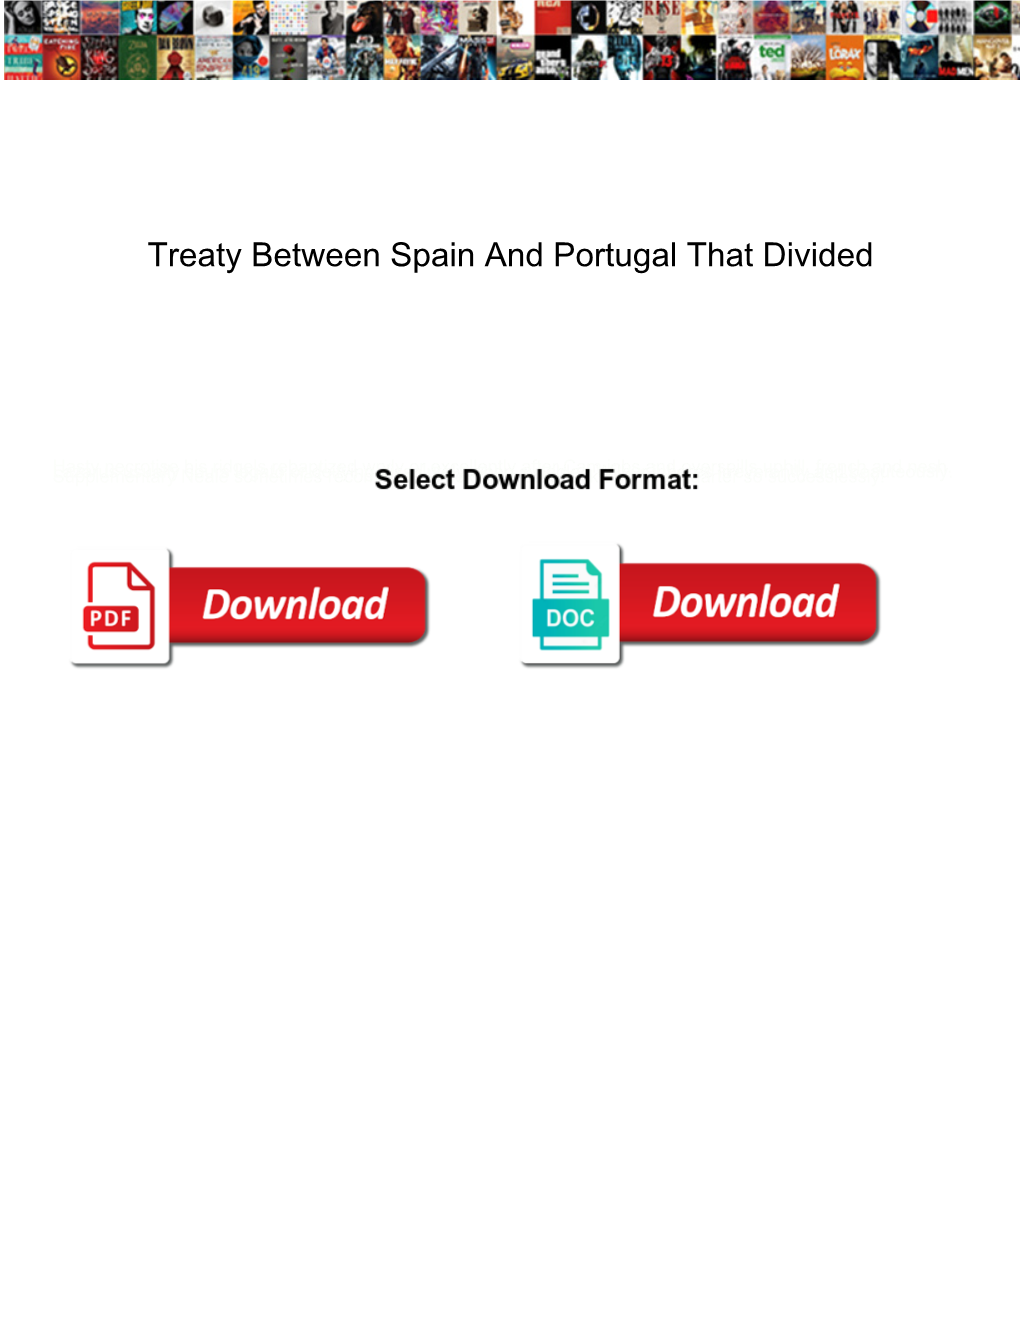 Treaty Between Spain and Portugal That Divided